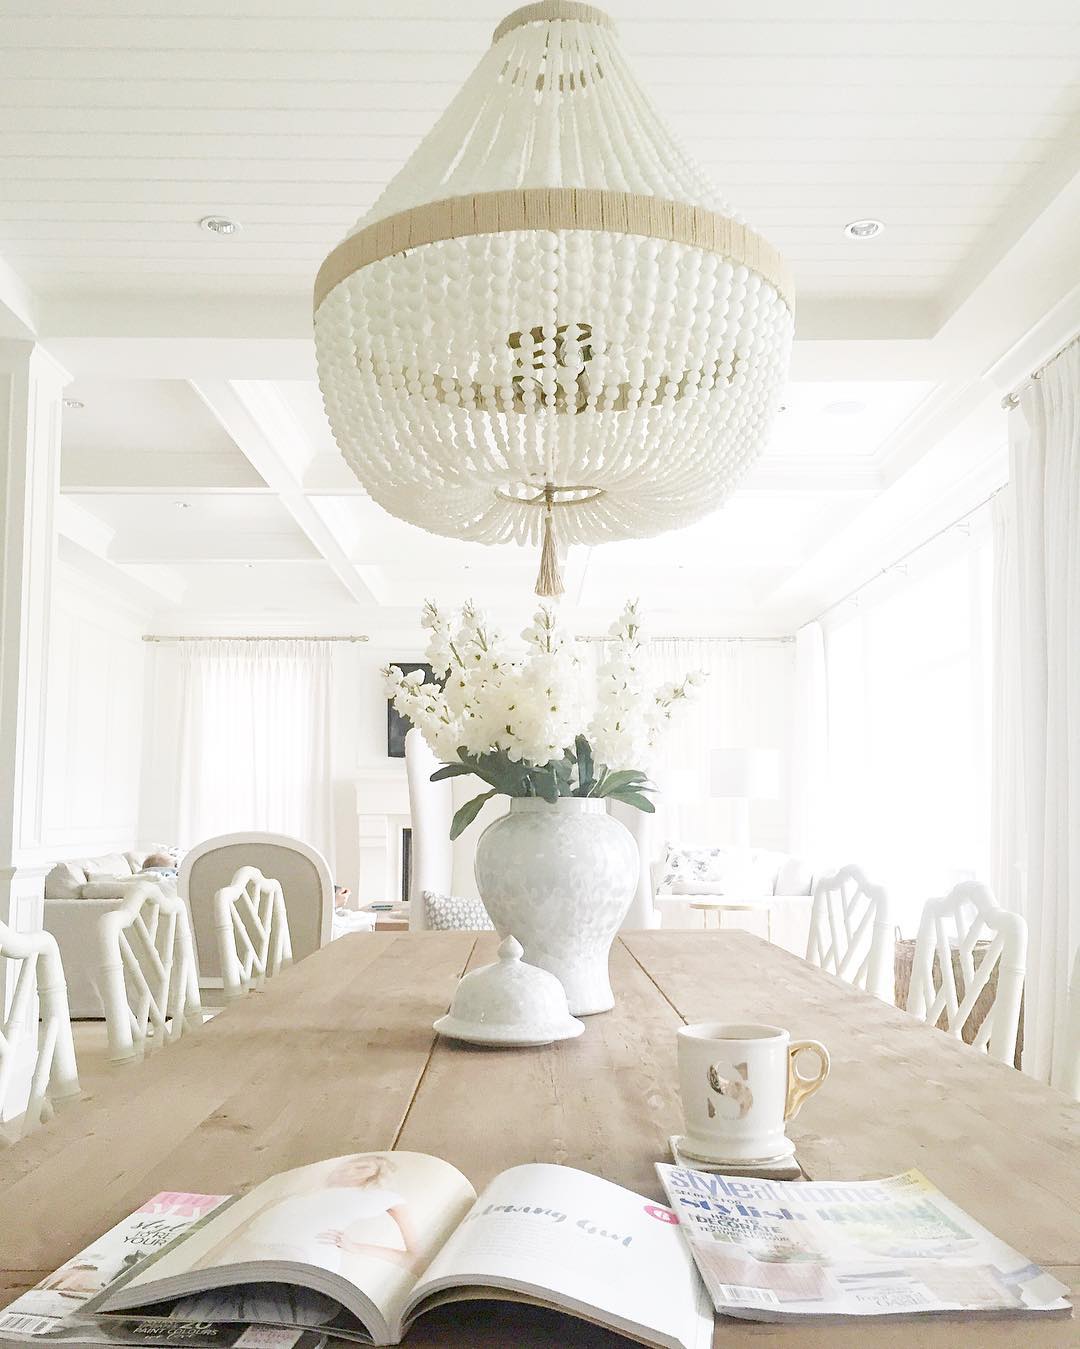 White painted wood paneled ceiling, white walls, blonde wood raw table.